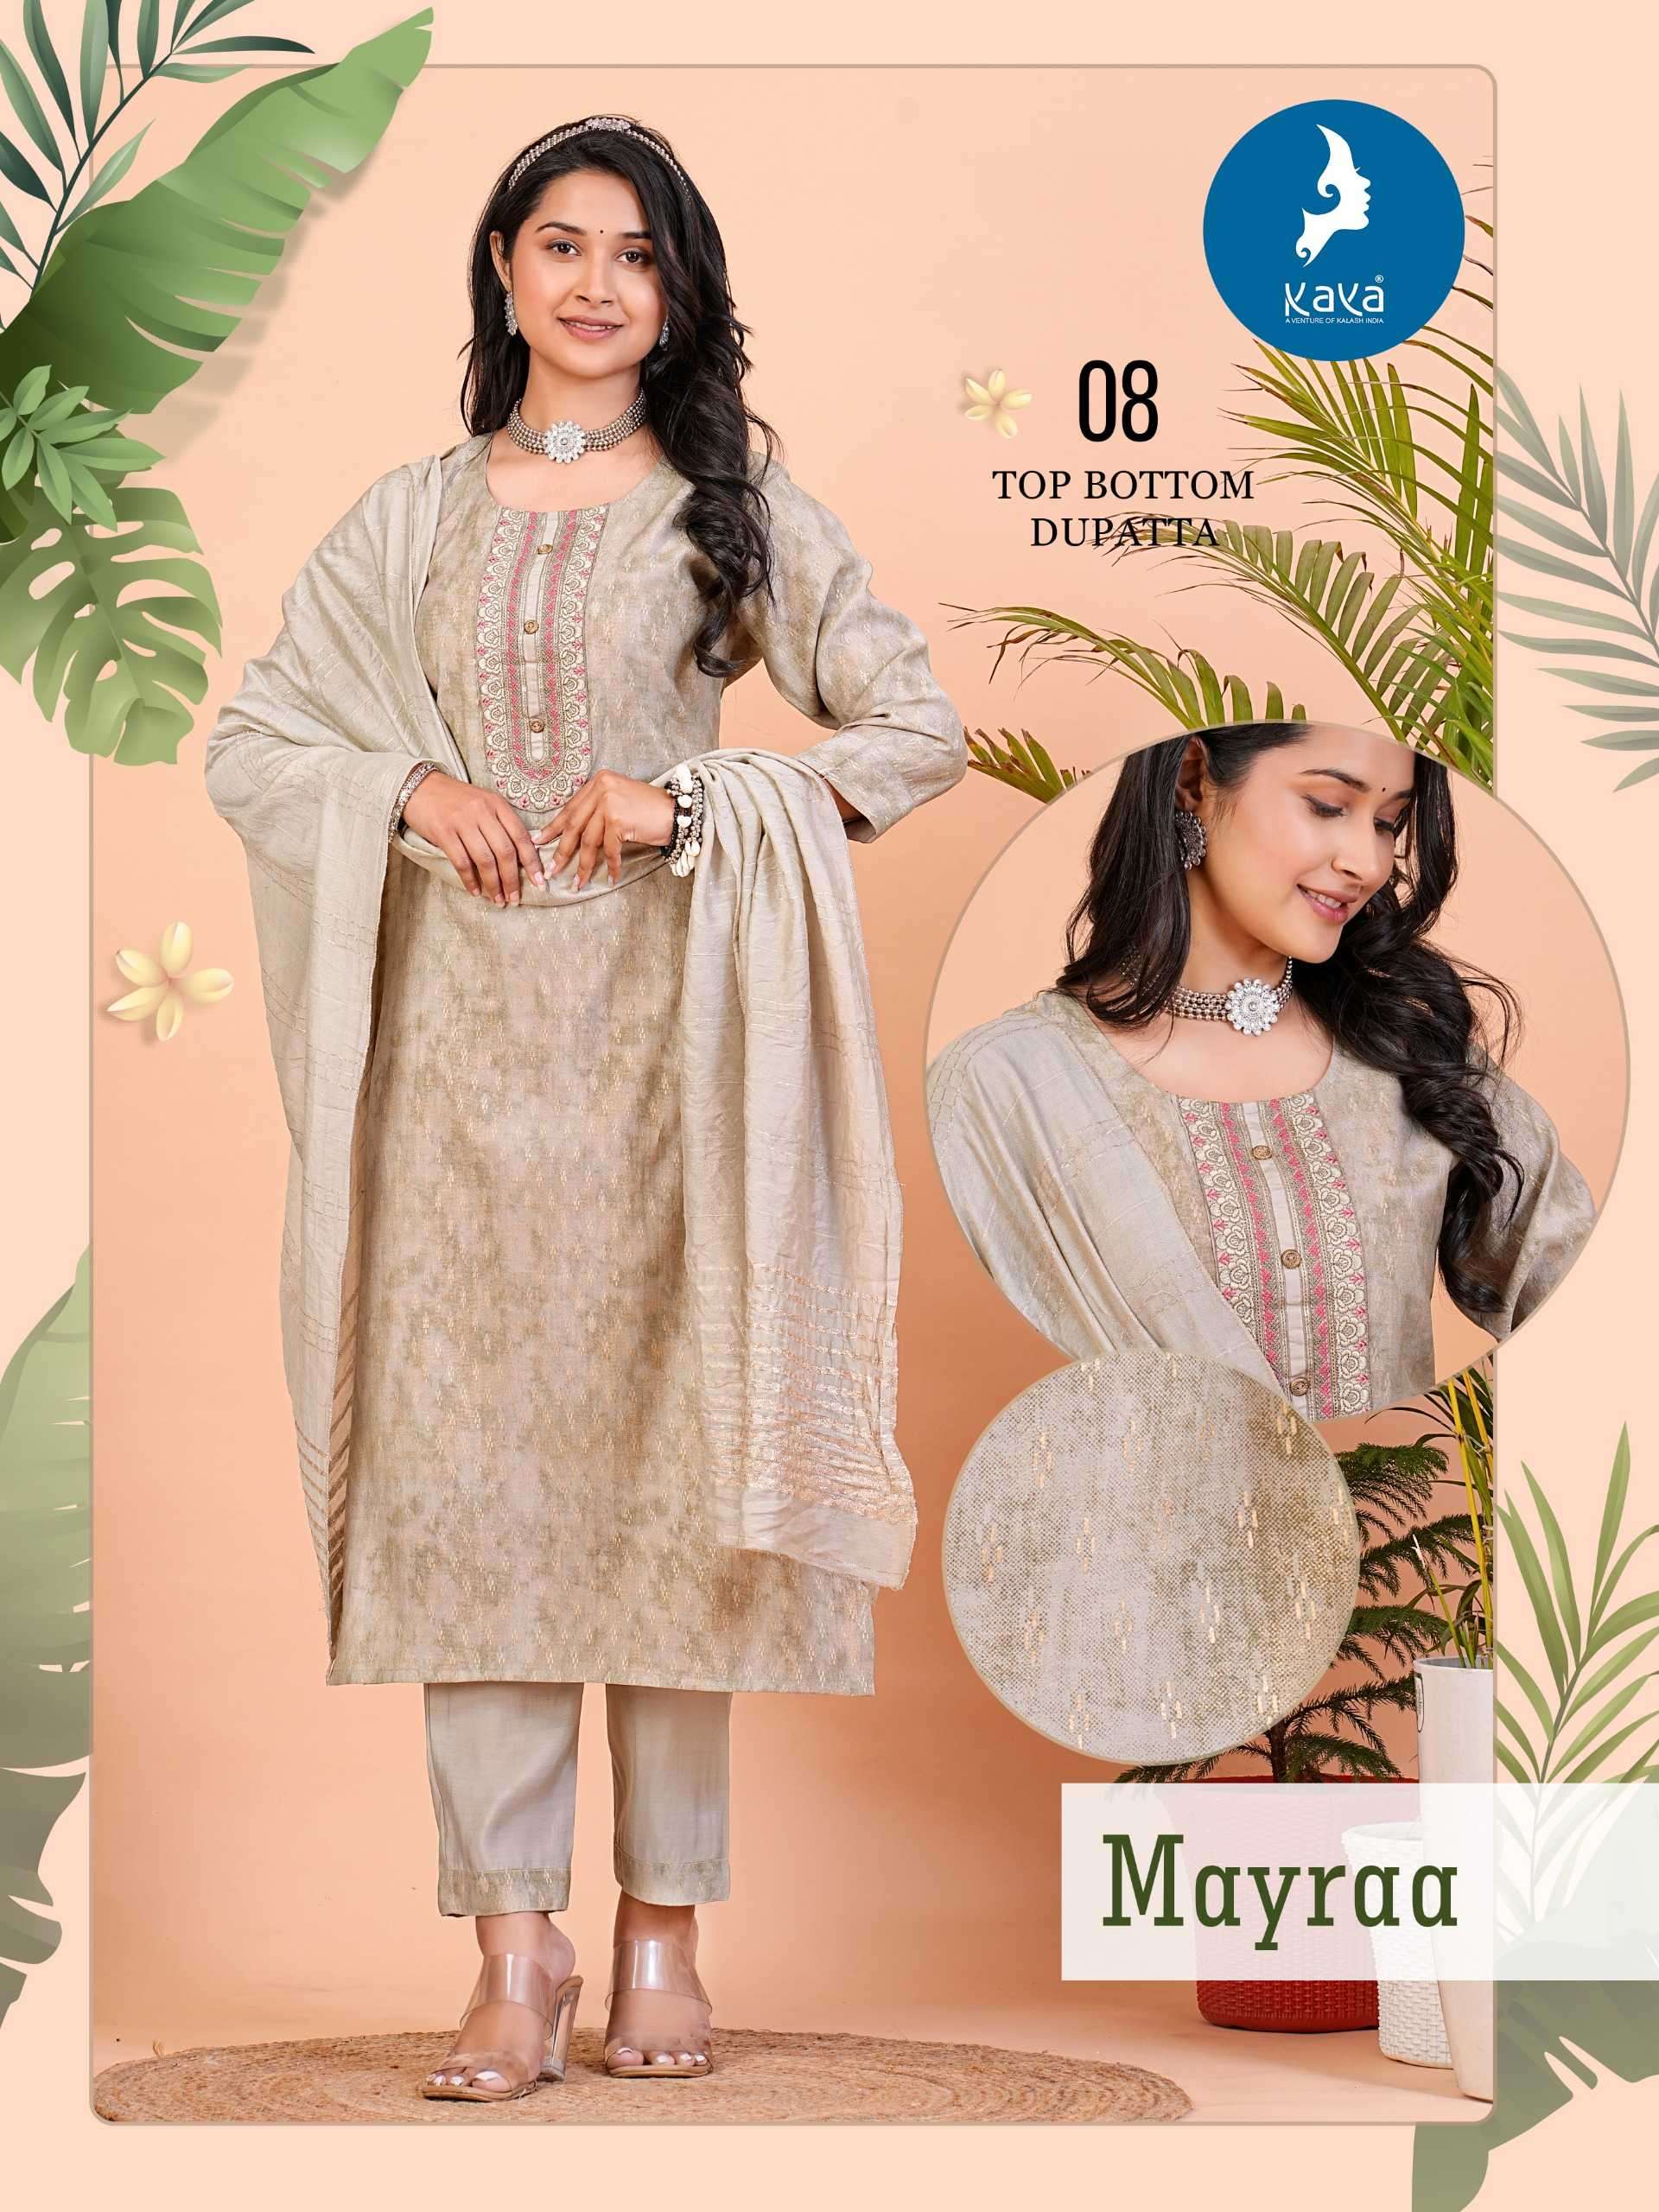 MAYRAA SERIES 01 TO 08 BY KAYA DESIGNER ROMAN SILK KURTI WITH BOTTOM AND DUPATTA ARE AVAILABLE AT WHOLESALE PRICE